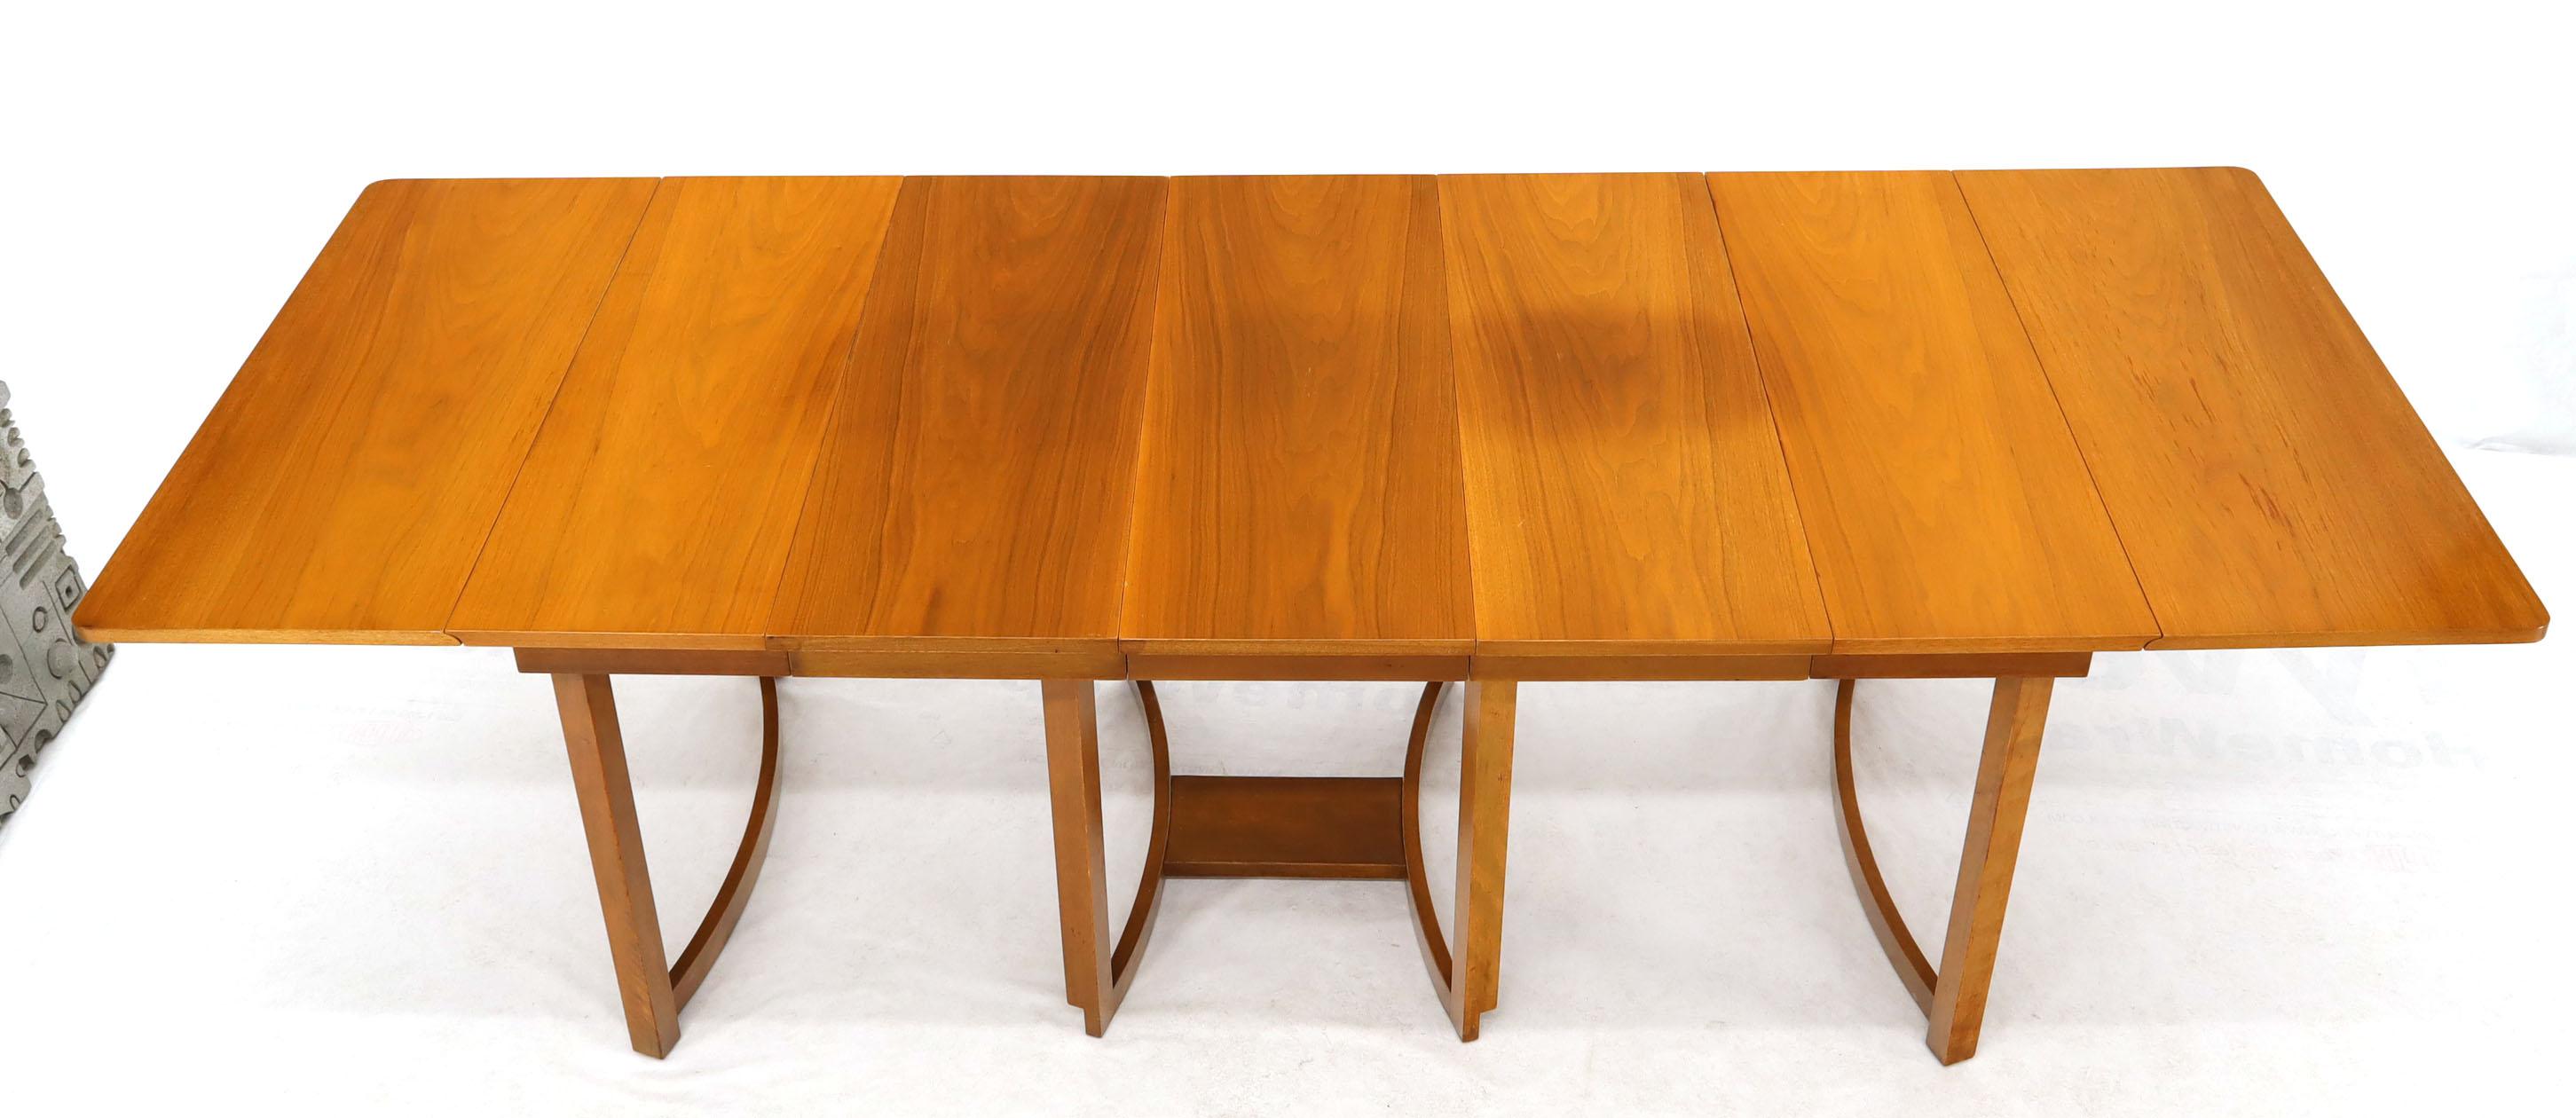 Midcentury Light Walnut Drop Leaf Expandable Dining Table, Three Leafs Boards im Angebot 9